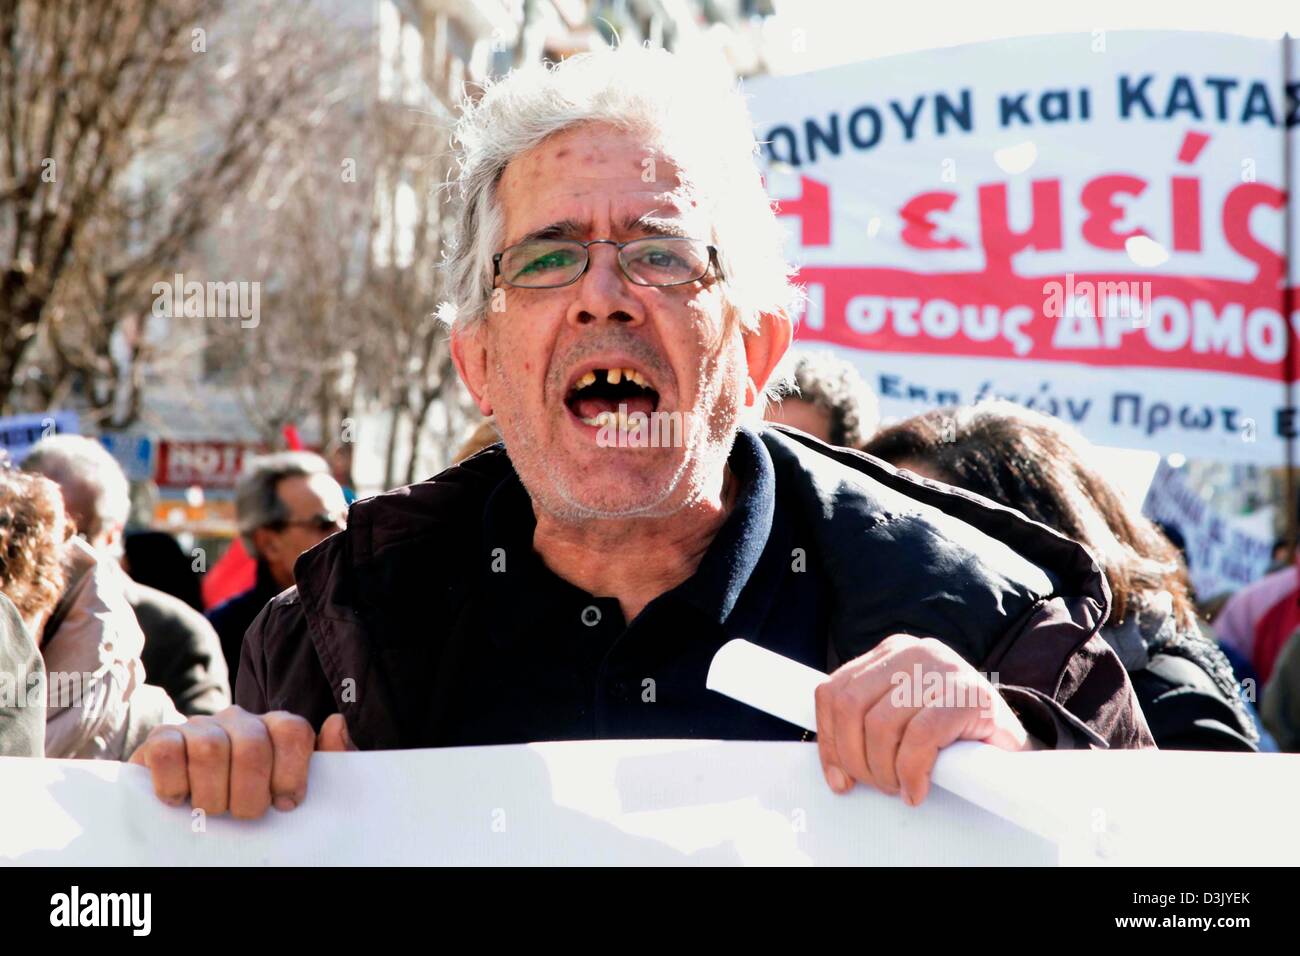 Thessaloniki, Greece. 20th February 2013. A demonstrator holding a banner while shouting during a general strike on 20/02/2013 in Thessaloniki, Greece. The strike was called by the trade union confederations of GSEE and ADEDY. Protesters were demonstrating against the austerity measures in Greece which has seen taxes increased and wages, pensions and public spending cut.  Credit:  Art of Focus / Alamy Live News Stock Photo